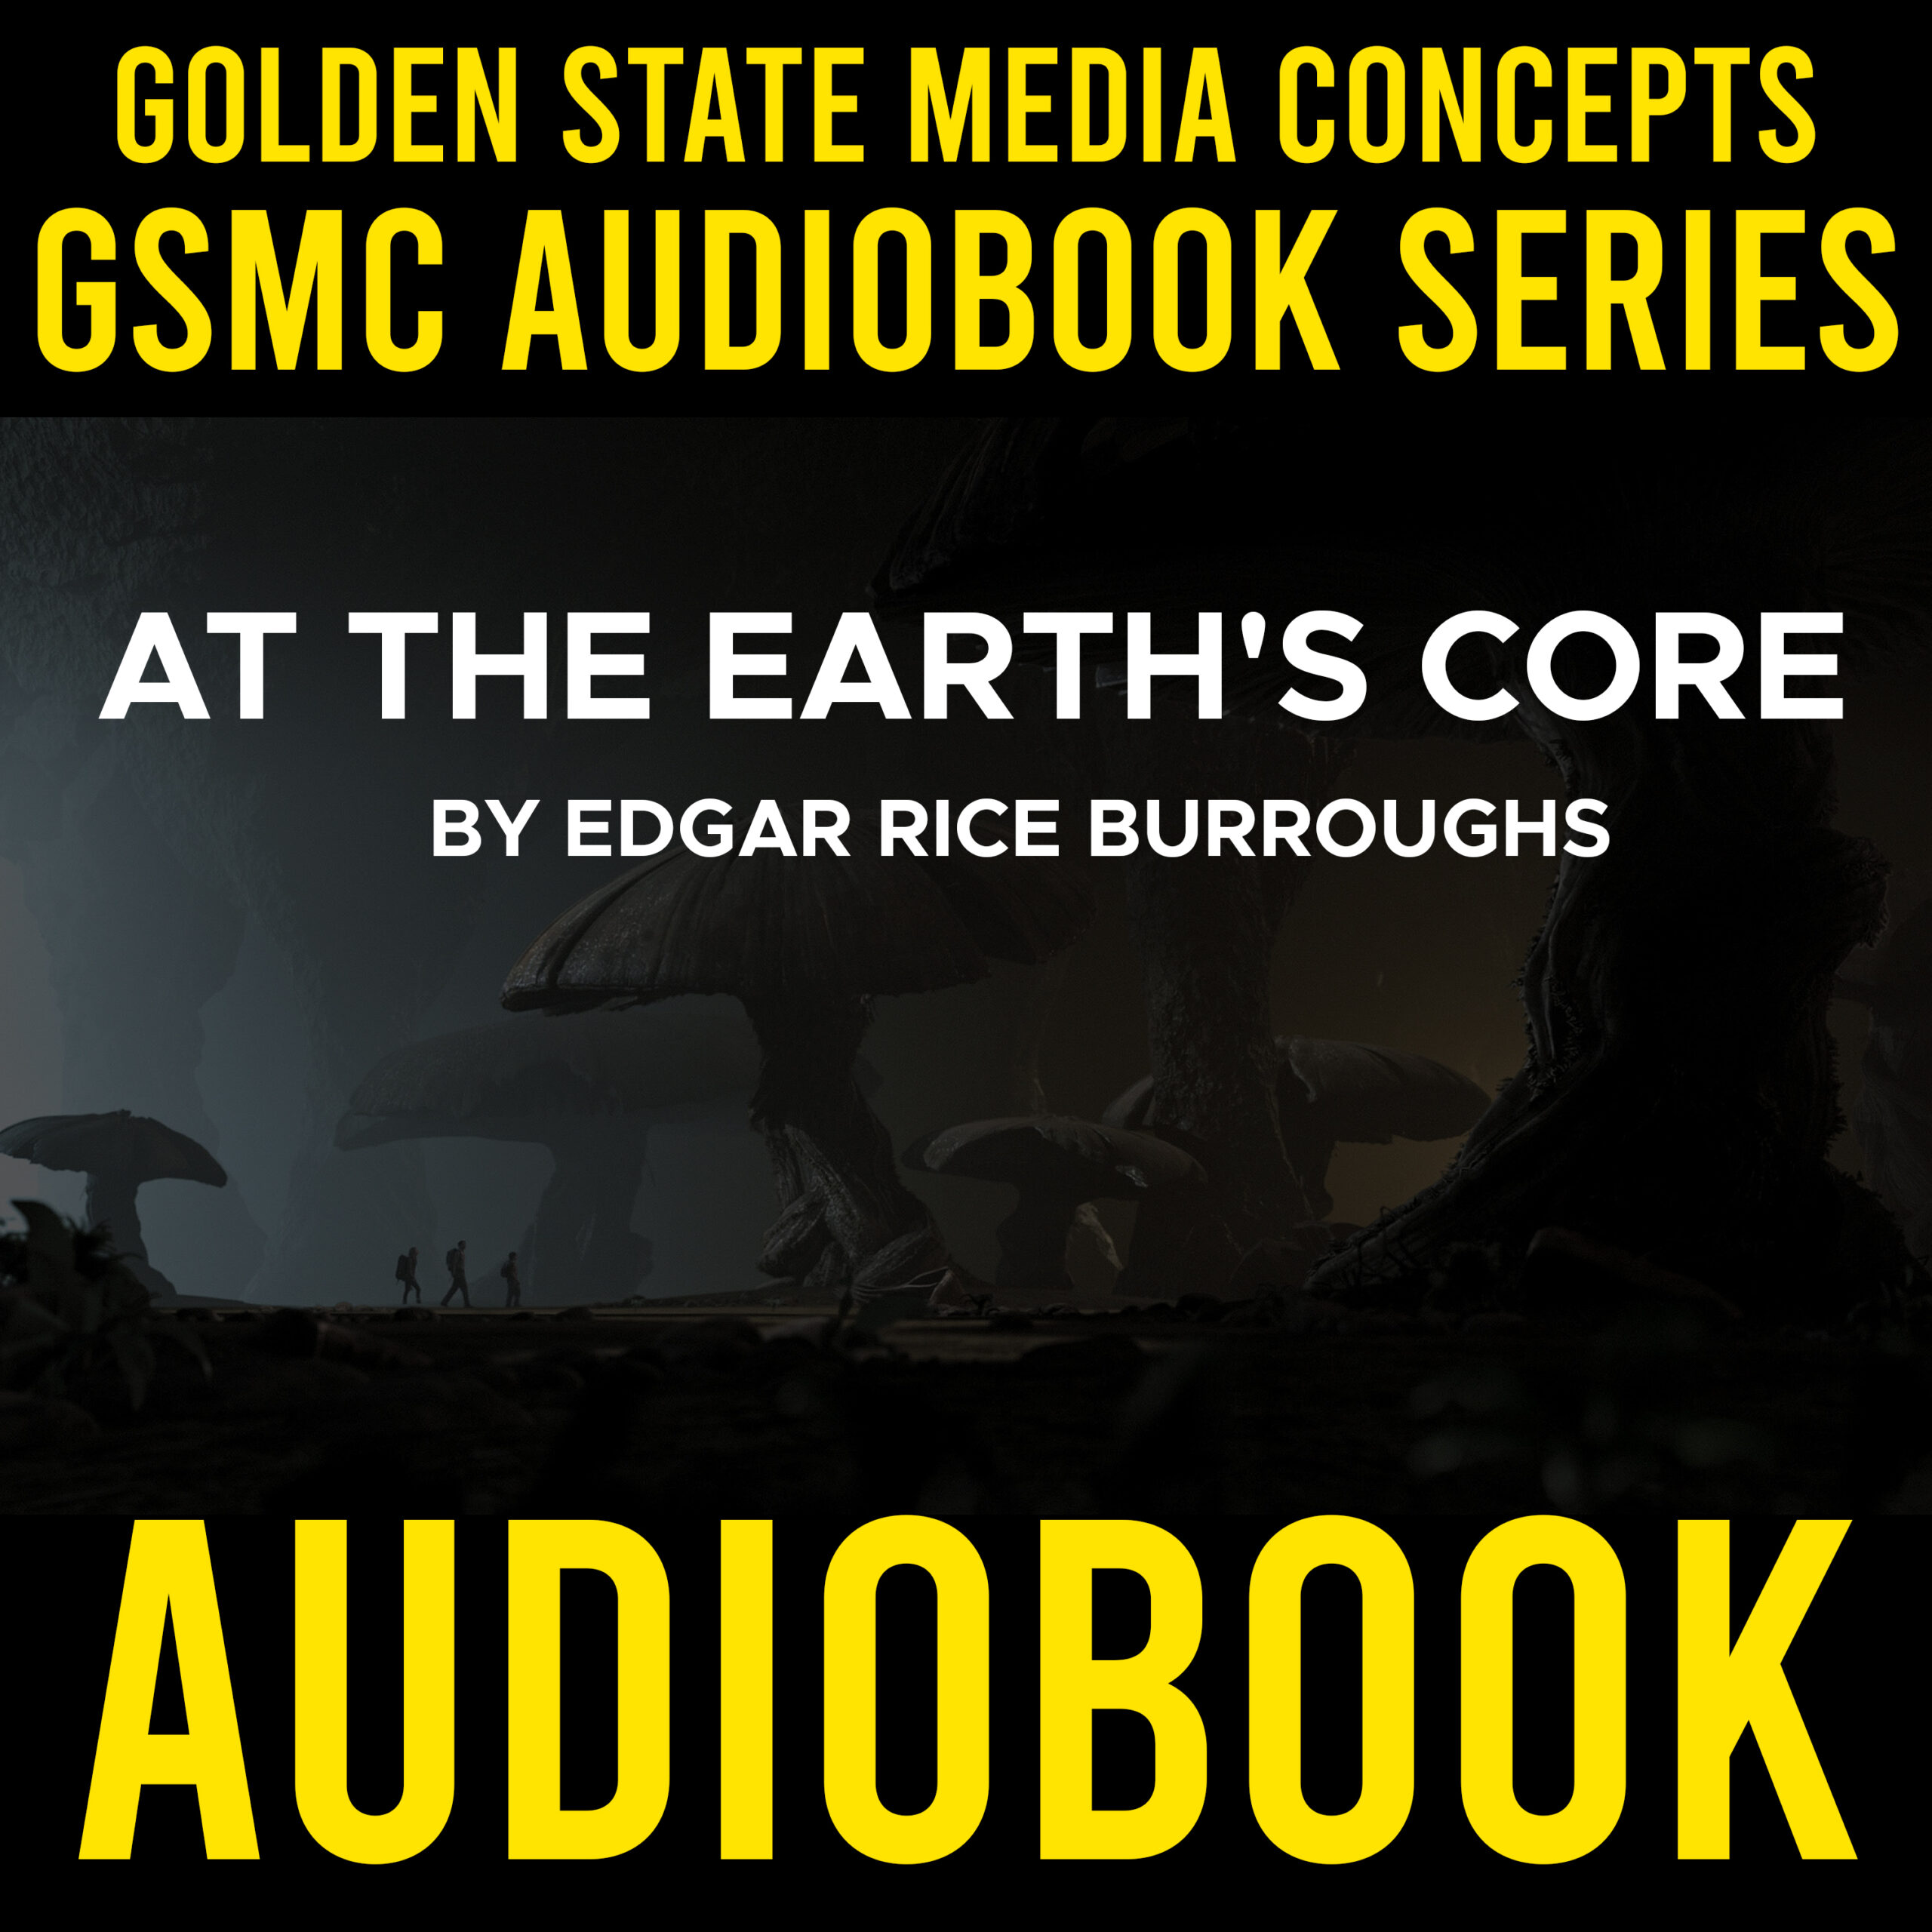 GSMC Audiobook Series: At the Earth's Core